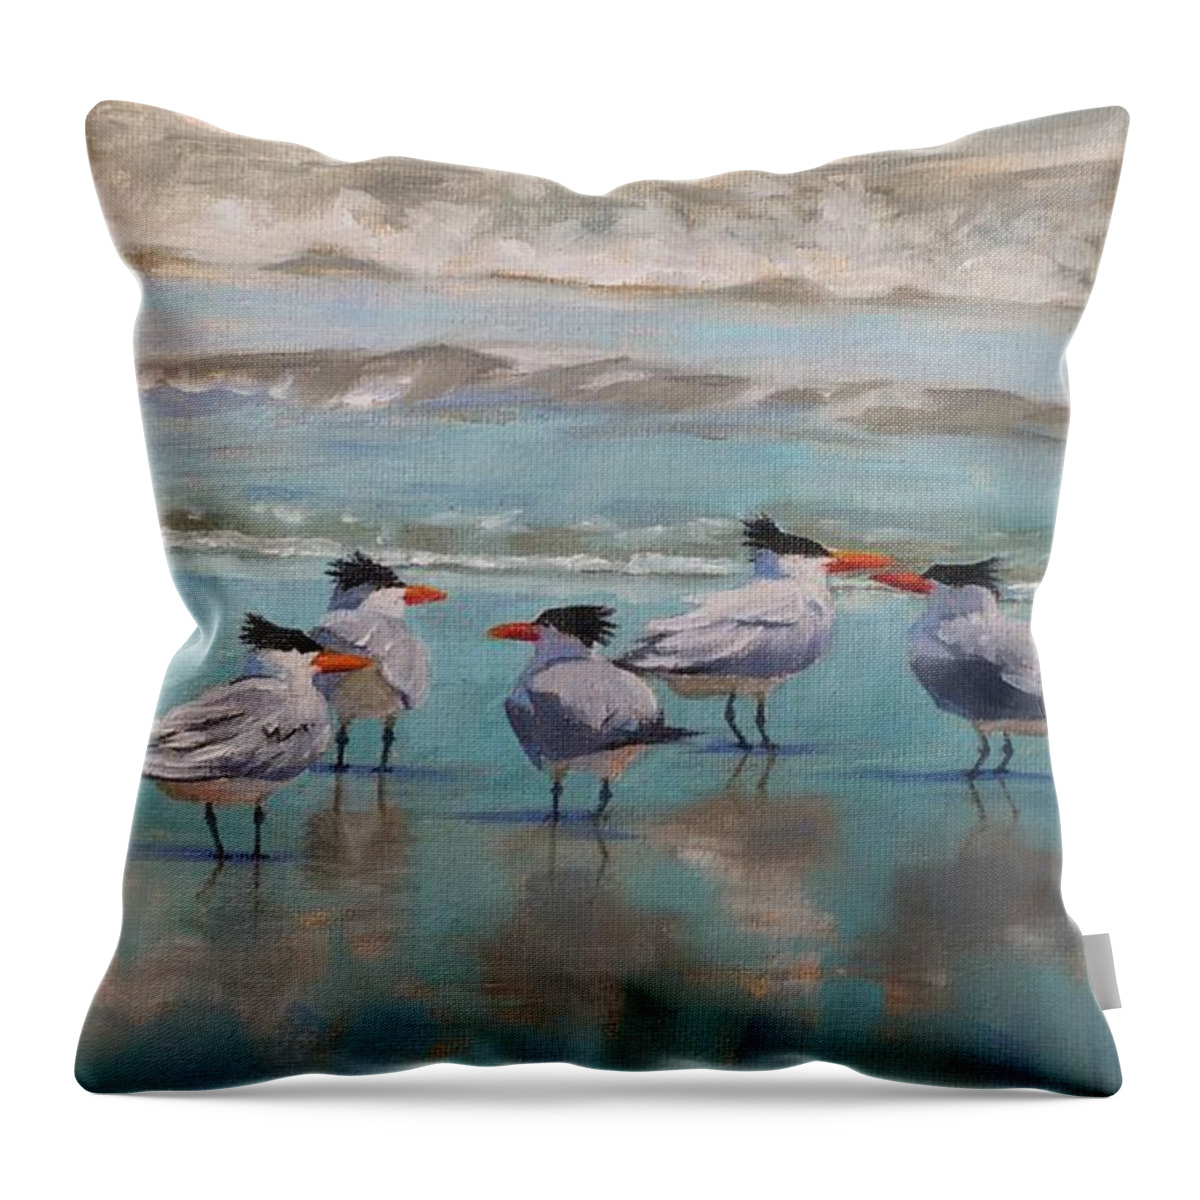 Eastern Throw Pillow featuring the painting Crowd Control by Pam Talley